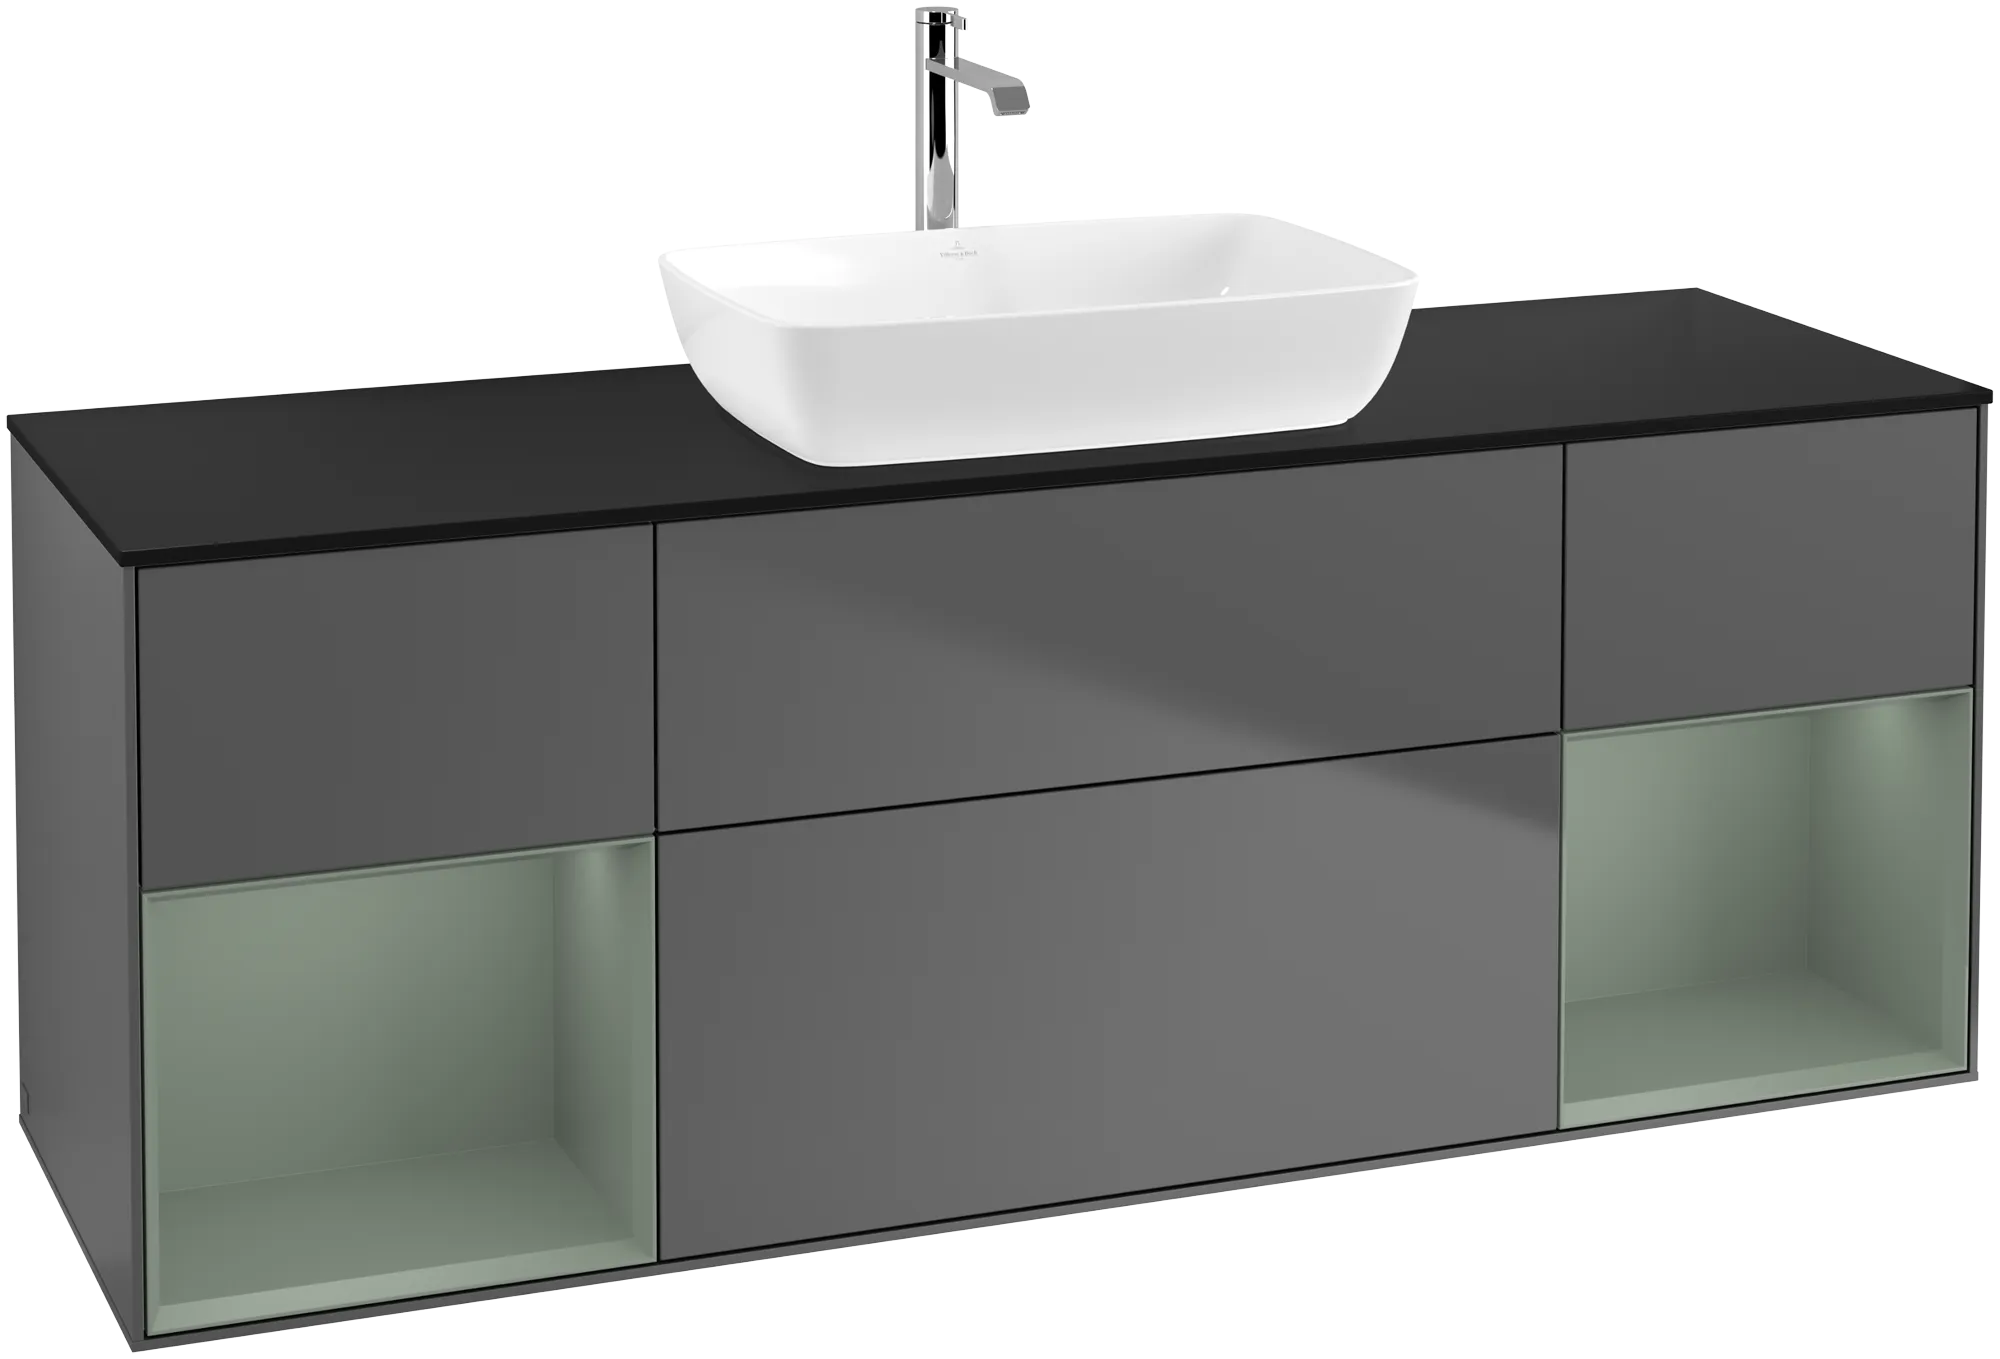 Picture of VILLEROY BOCH Finion Vanity unit, with lighting, 4 pull-out compartments, 1600 x 603 x 501 mm, Anthracite Matt Lacquer / Olive Matt Lacquer / Glass Black Matt #G862GMGK